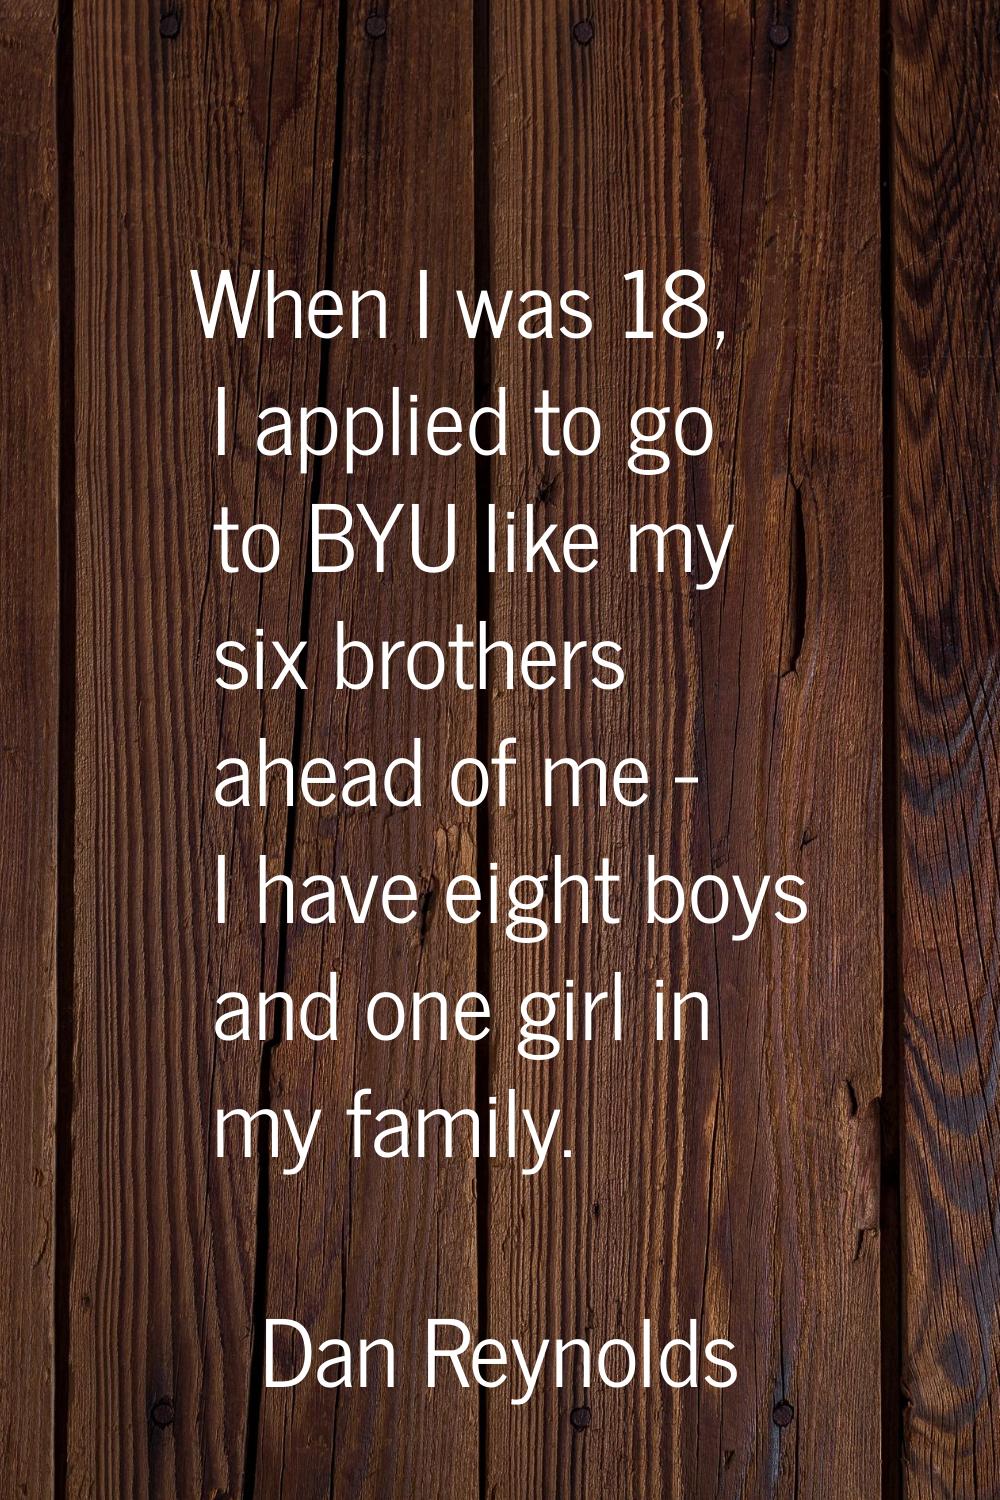 When I was 18, I applied to go to BYU like my six brothers ahead of me - I have eight boys and one 